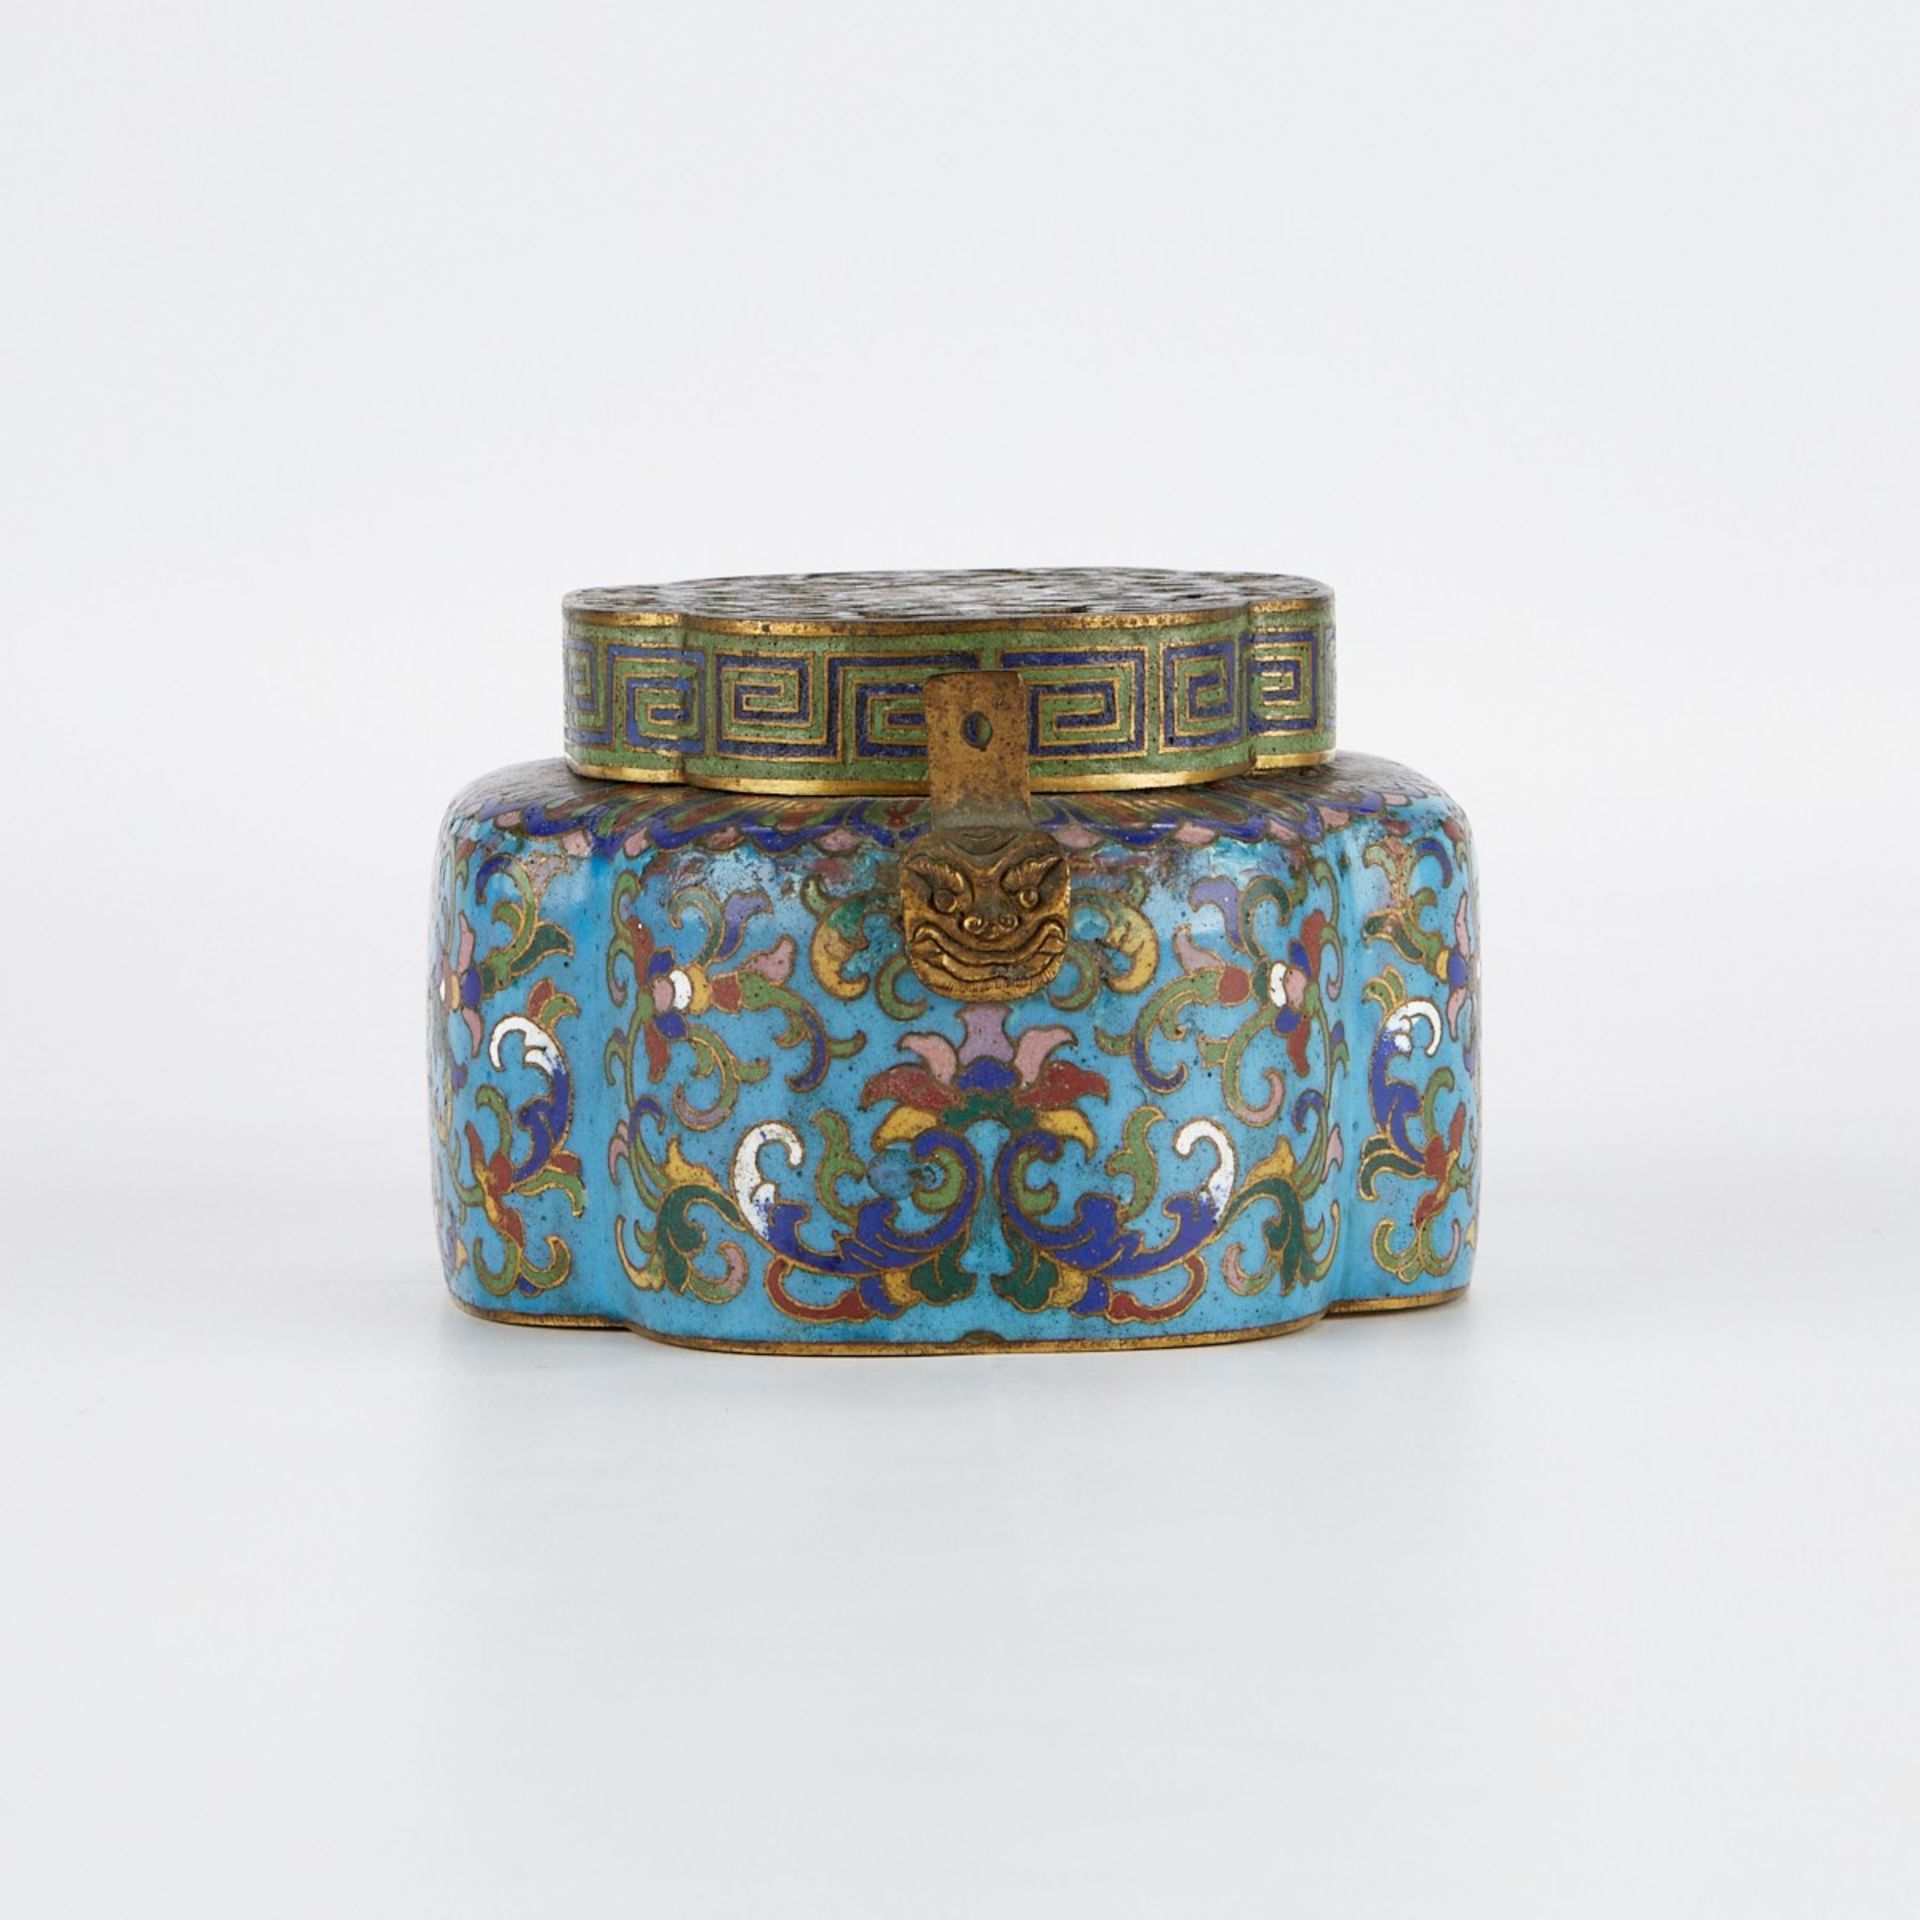 18th c. Chinese Cloisonne Hand Warmer - Image 3 of 9